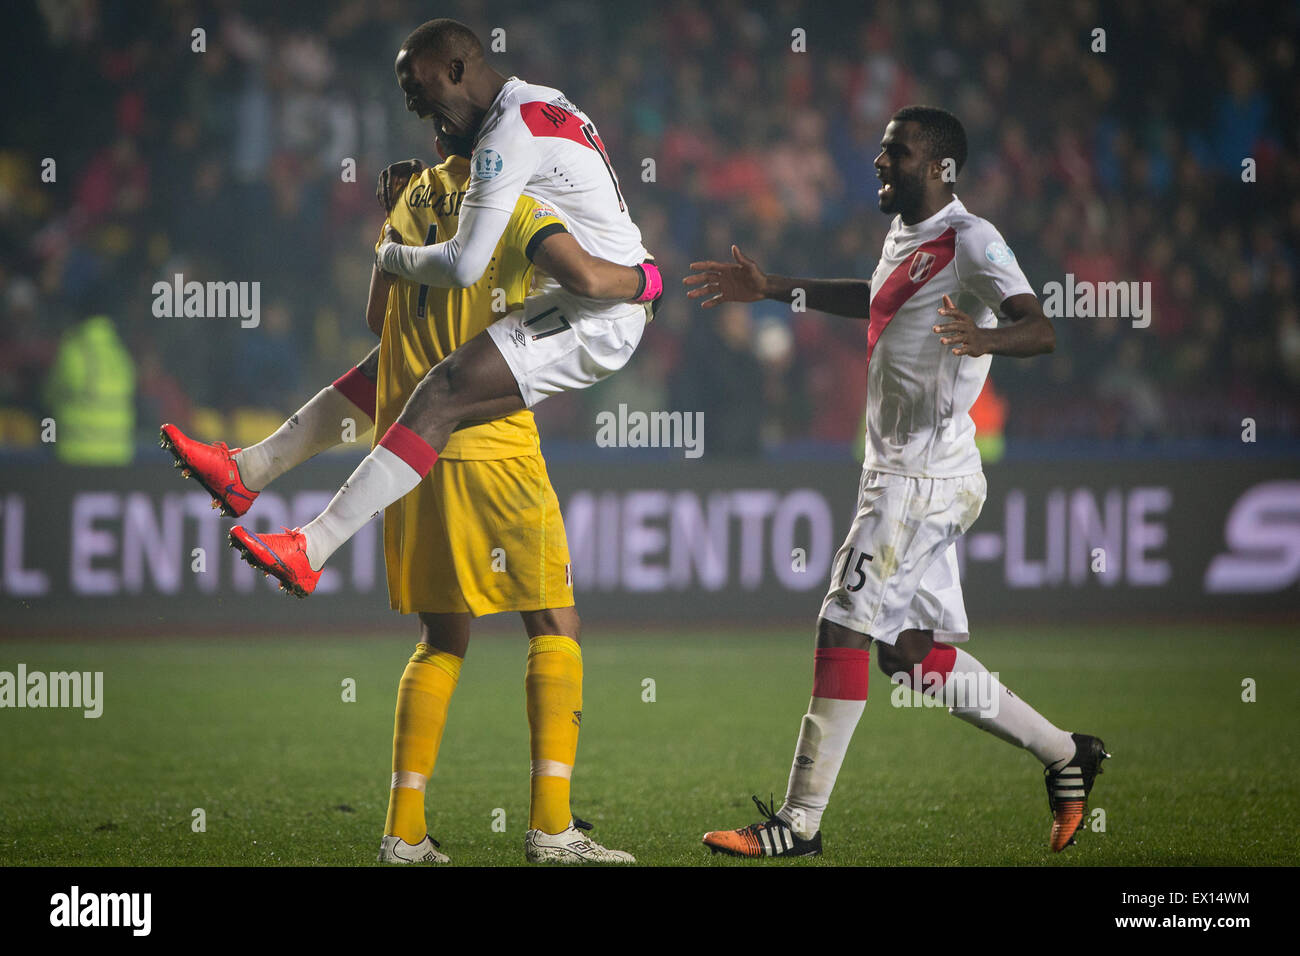 Concepcion, Chile. 3rd July, 2015. Peru's goalkeeper Pedro Gallese (L) and Luis Advincula (C) and Christian Ramos celebrate a score during the match for the Third Place of the America Cup Chile 2015, against Paraguay, held in the Municipal Stadium 'Alcaldesa Ester Roa Rebolledo', in Concepcion, Chile, on July 3, 2015. Peru won the match. Credit:  Pedro Mera/Xinhua/Alamy Live News Stock Photo